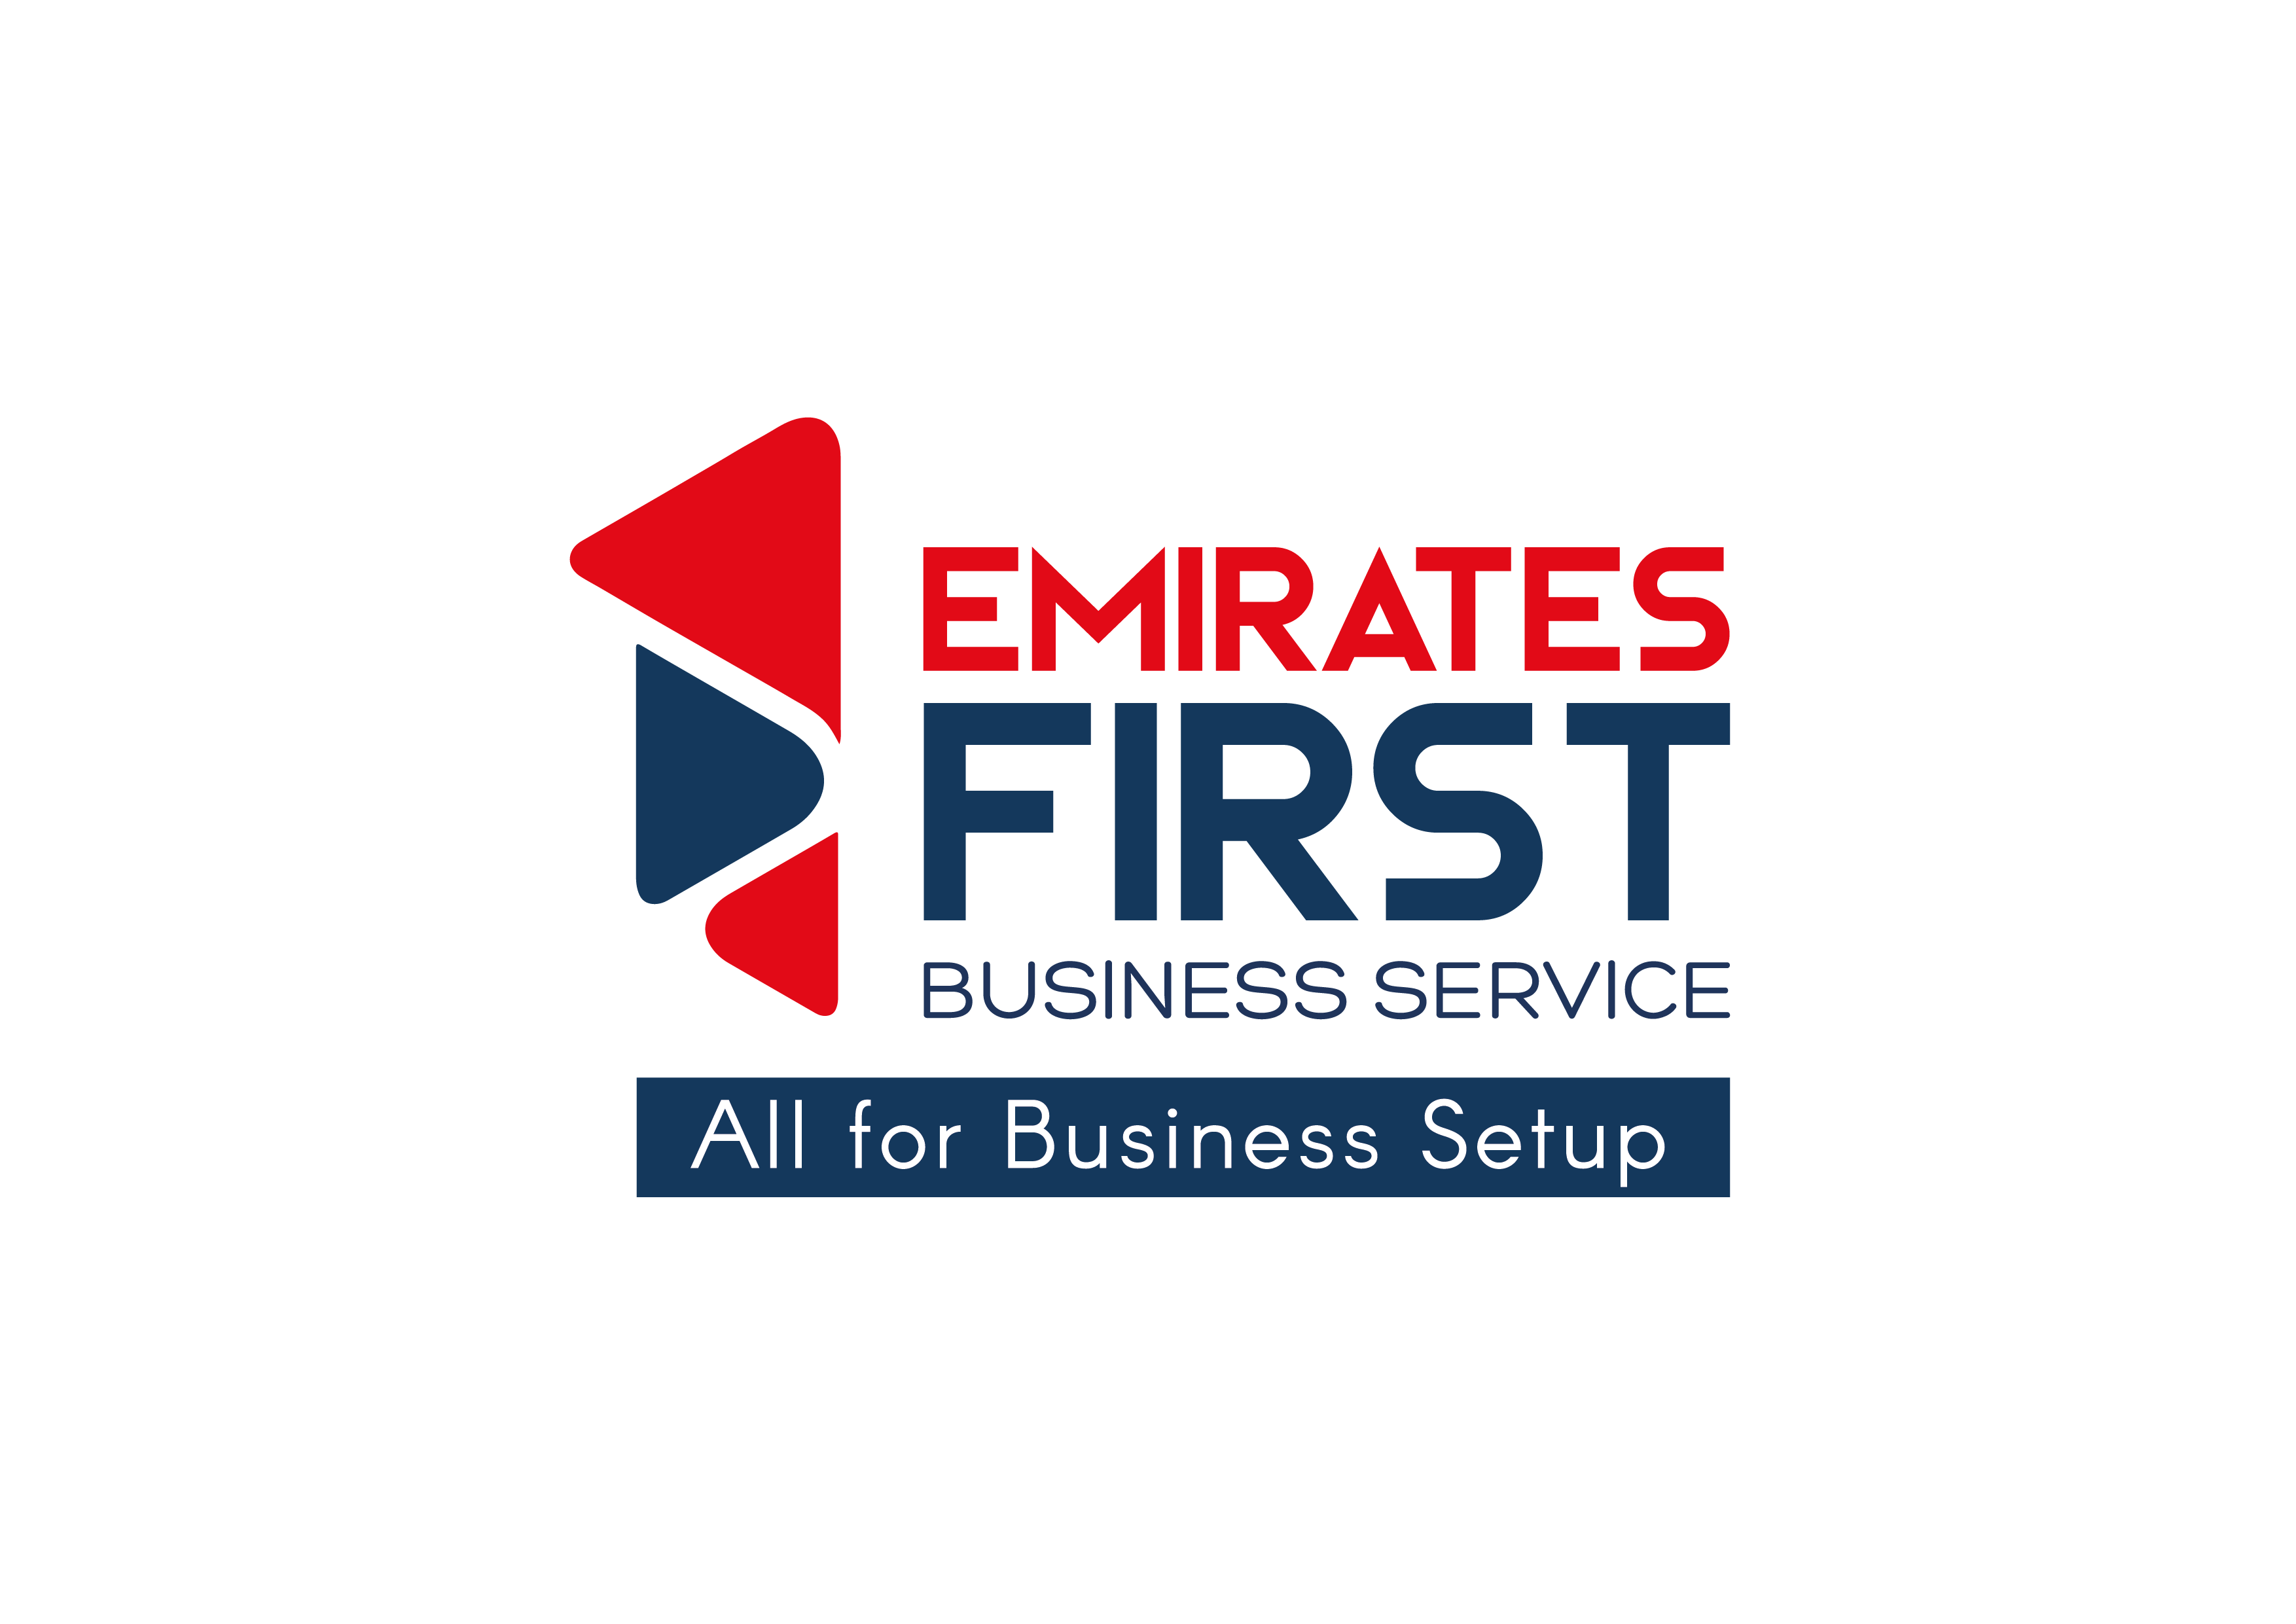 Emirates First Business Service